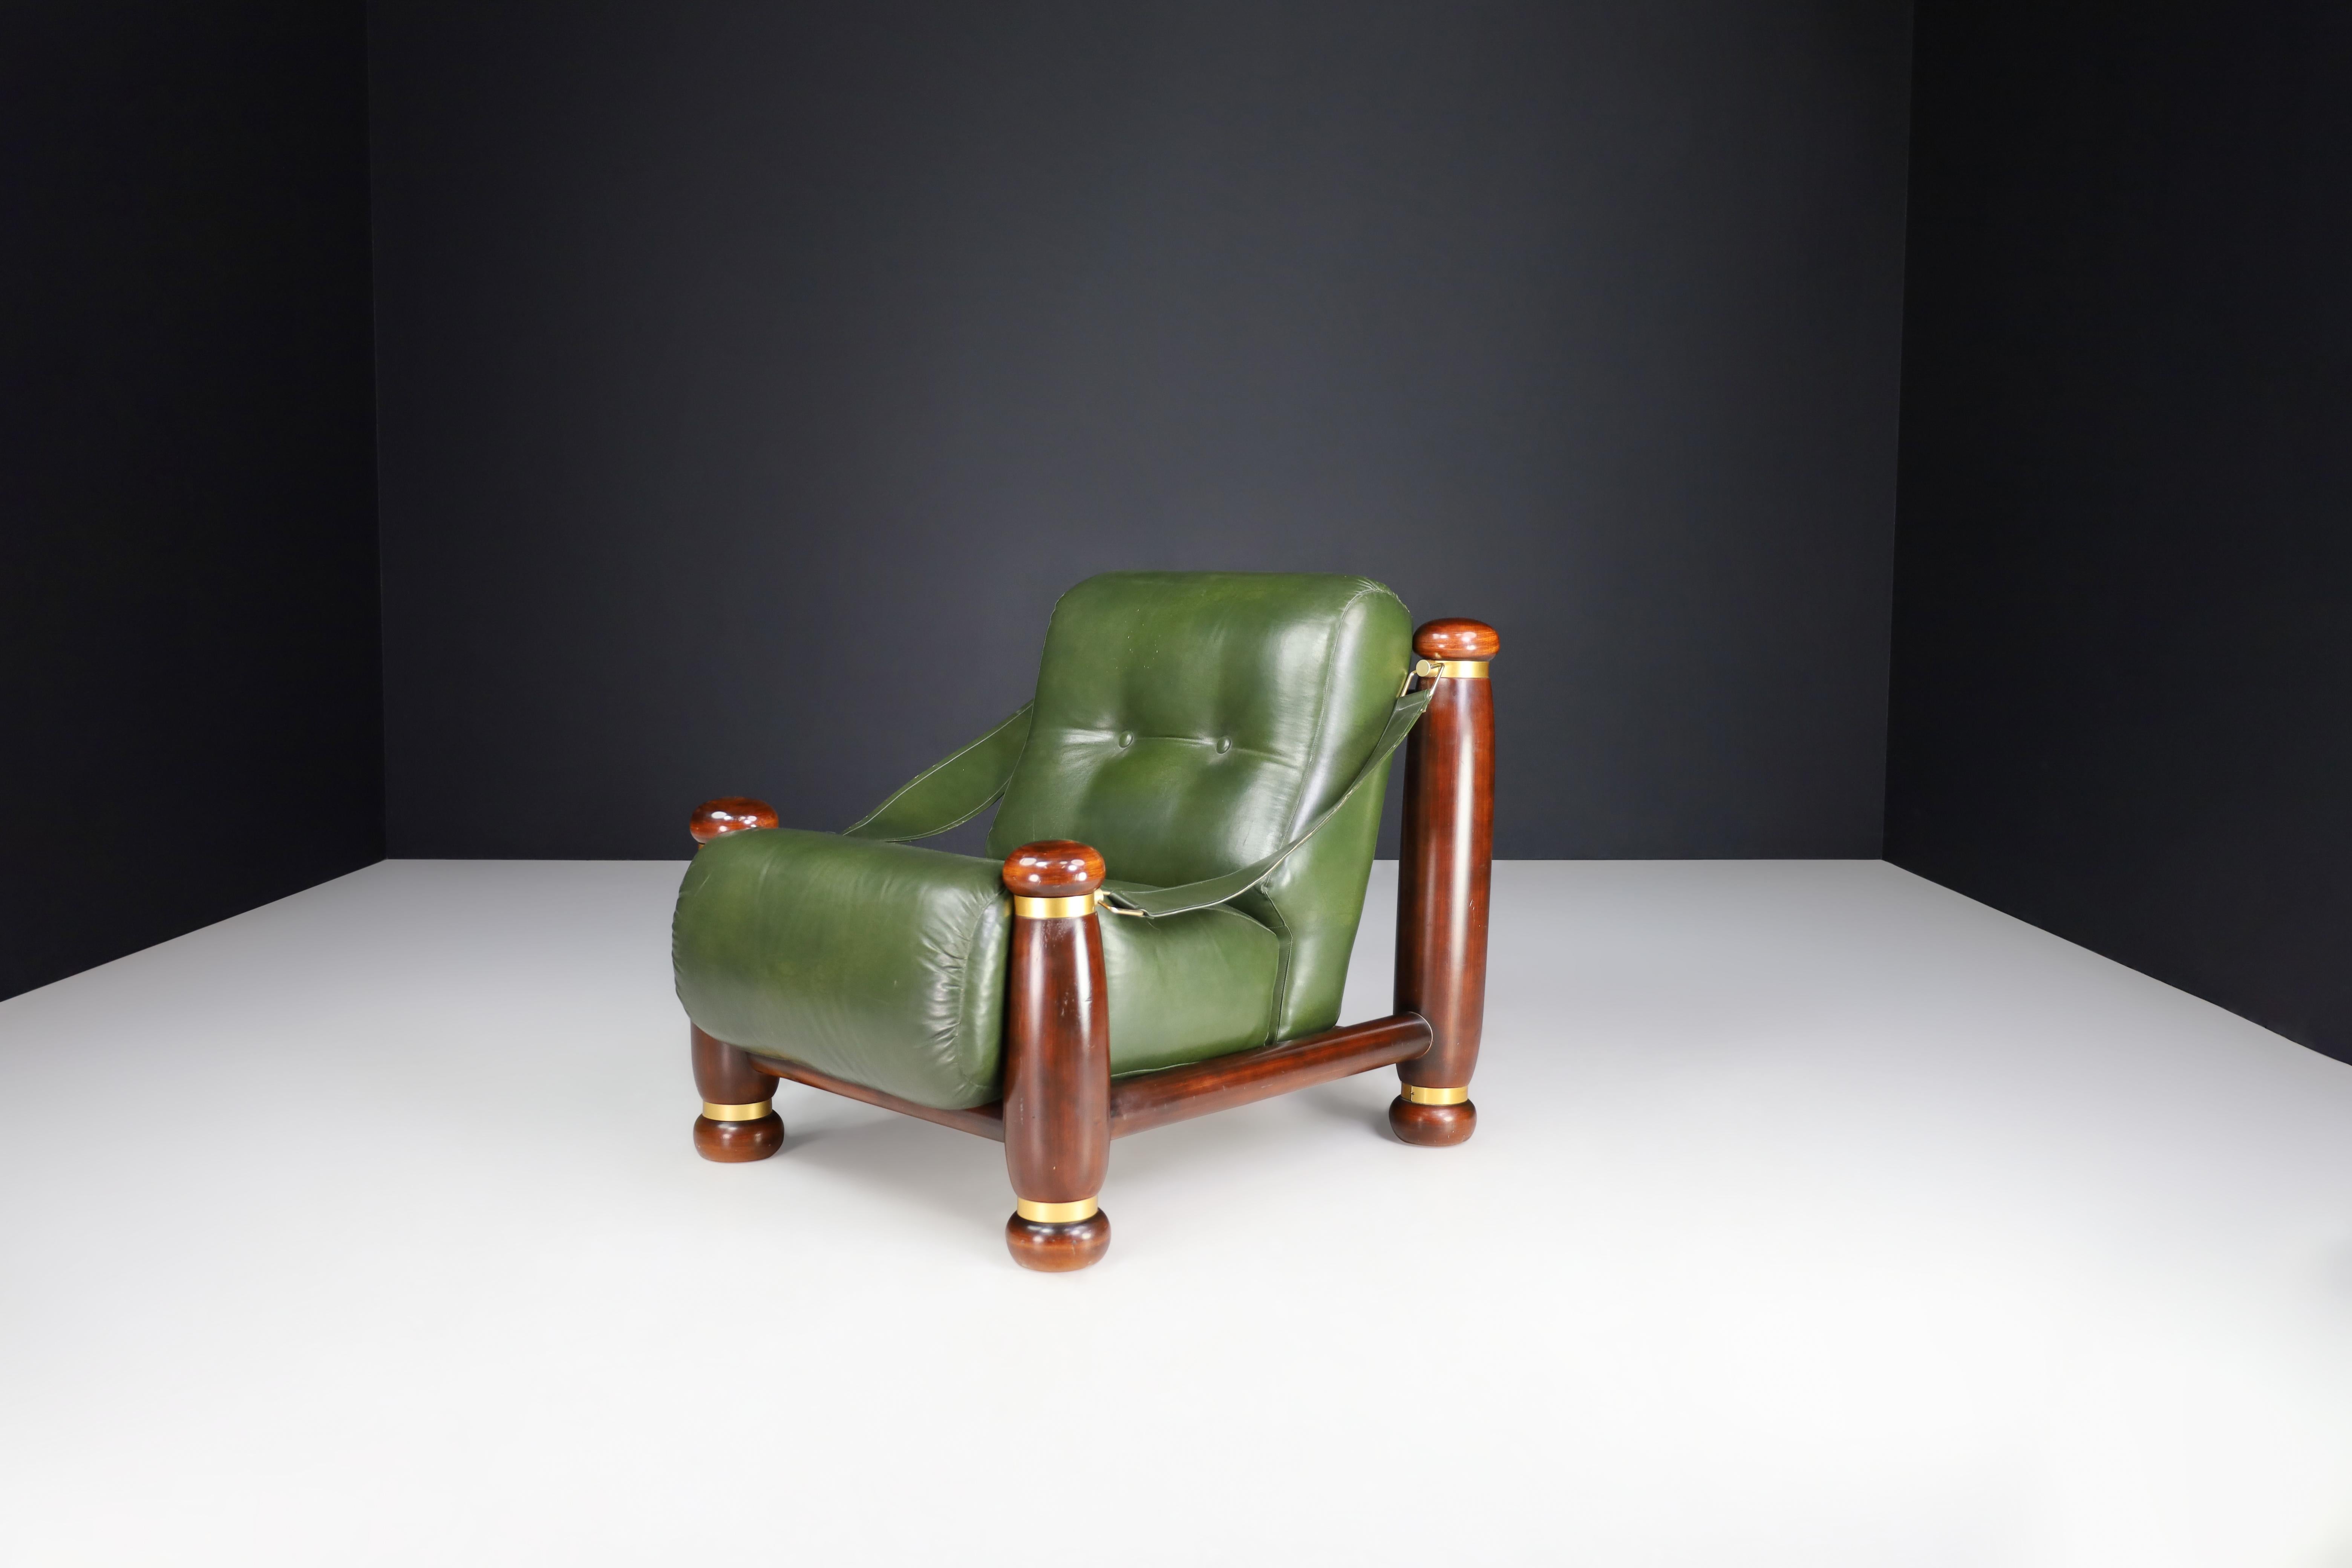 Walnut, Brass, And Green leather Lounge Chairs from Italy 1960s

These bulky lounge chairs, made in Italy during the 1960s, feature a stylish design that combines walnut, brass, and leather elements. They would make a striking addition to any